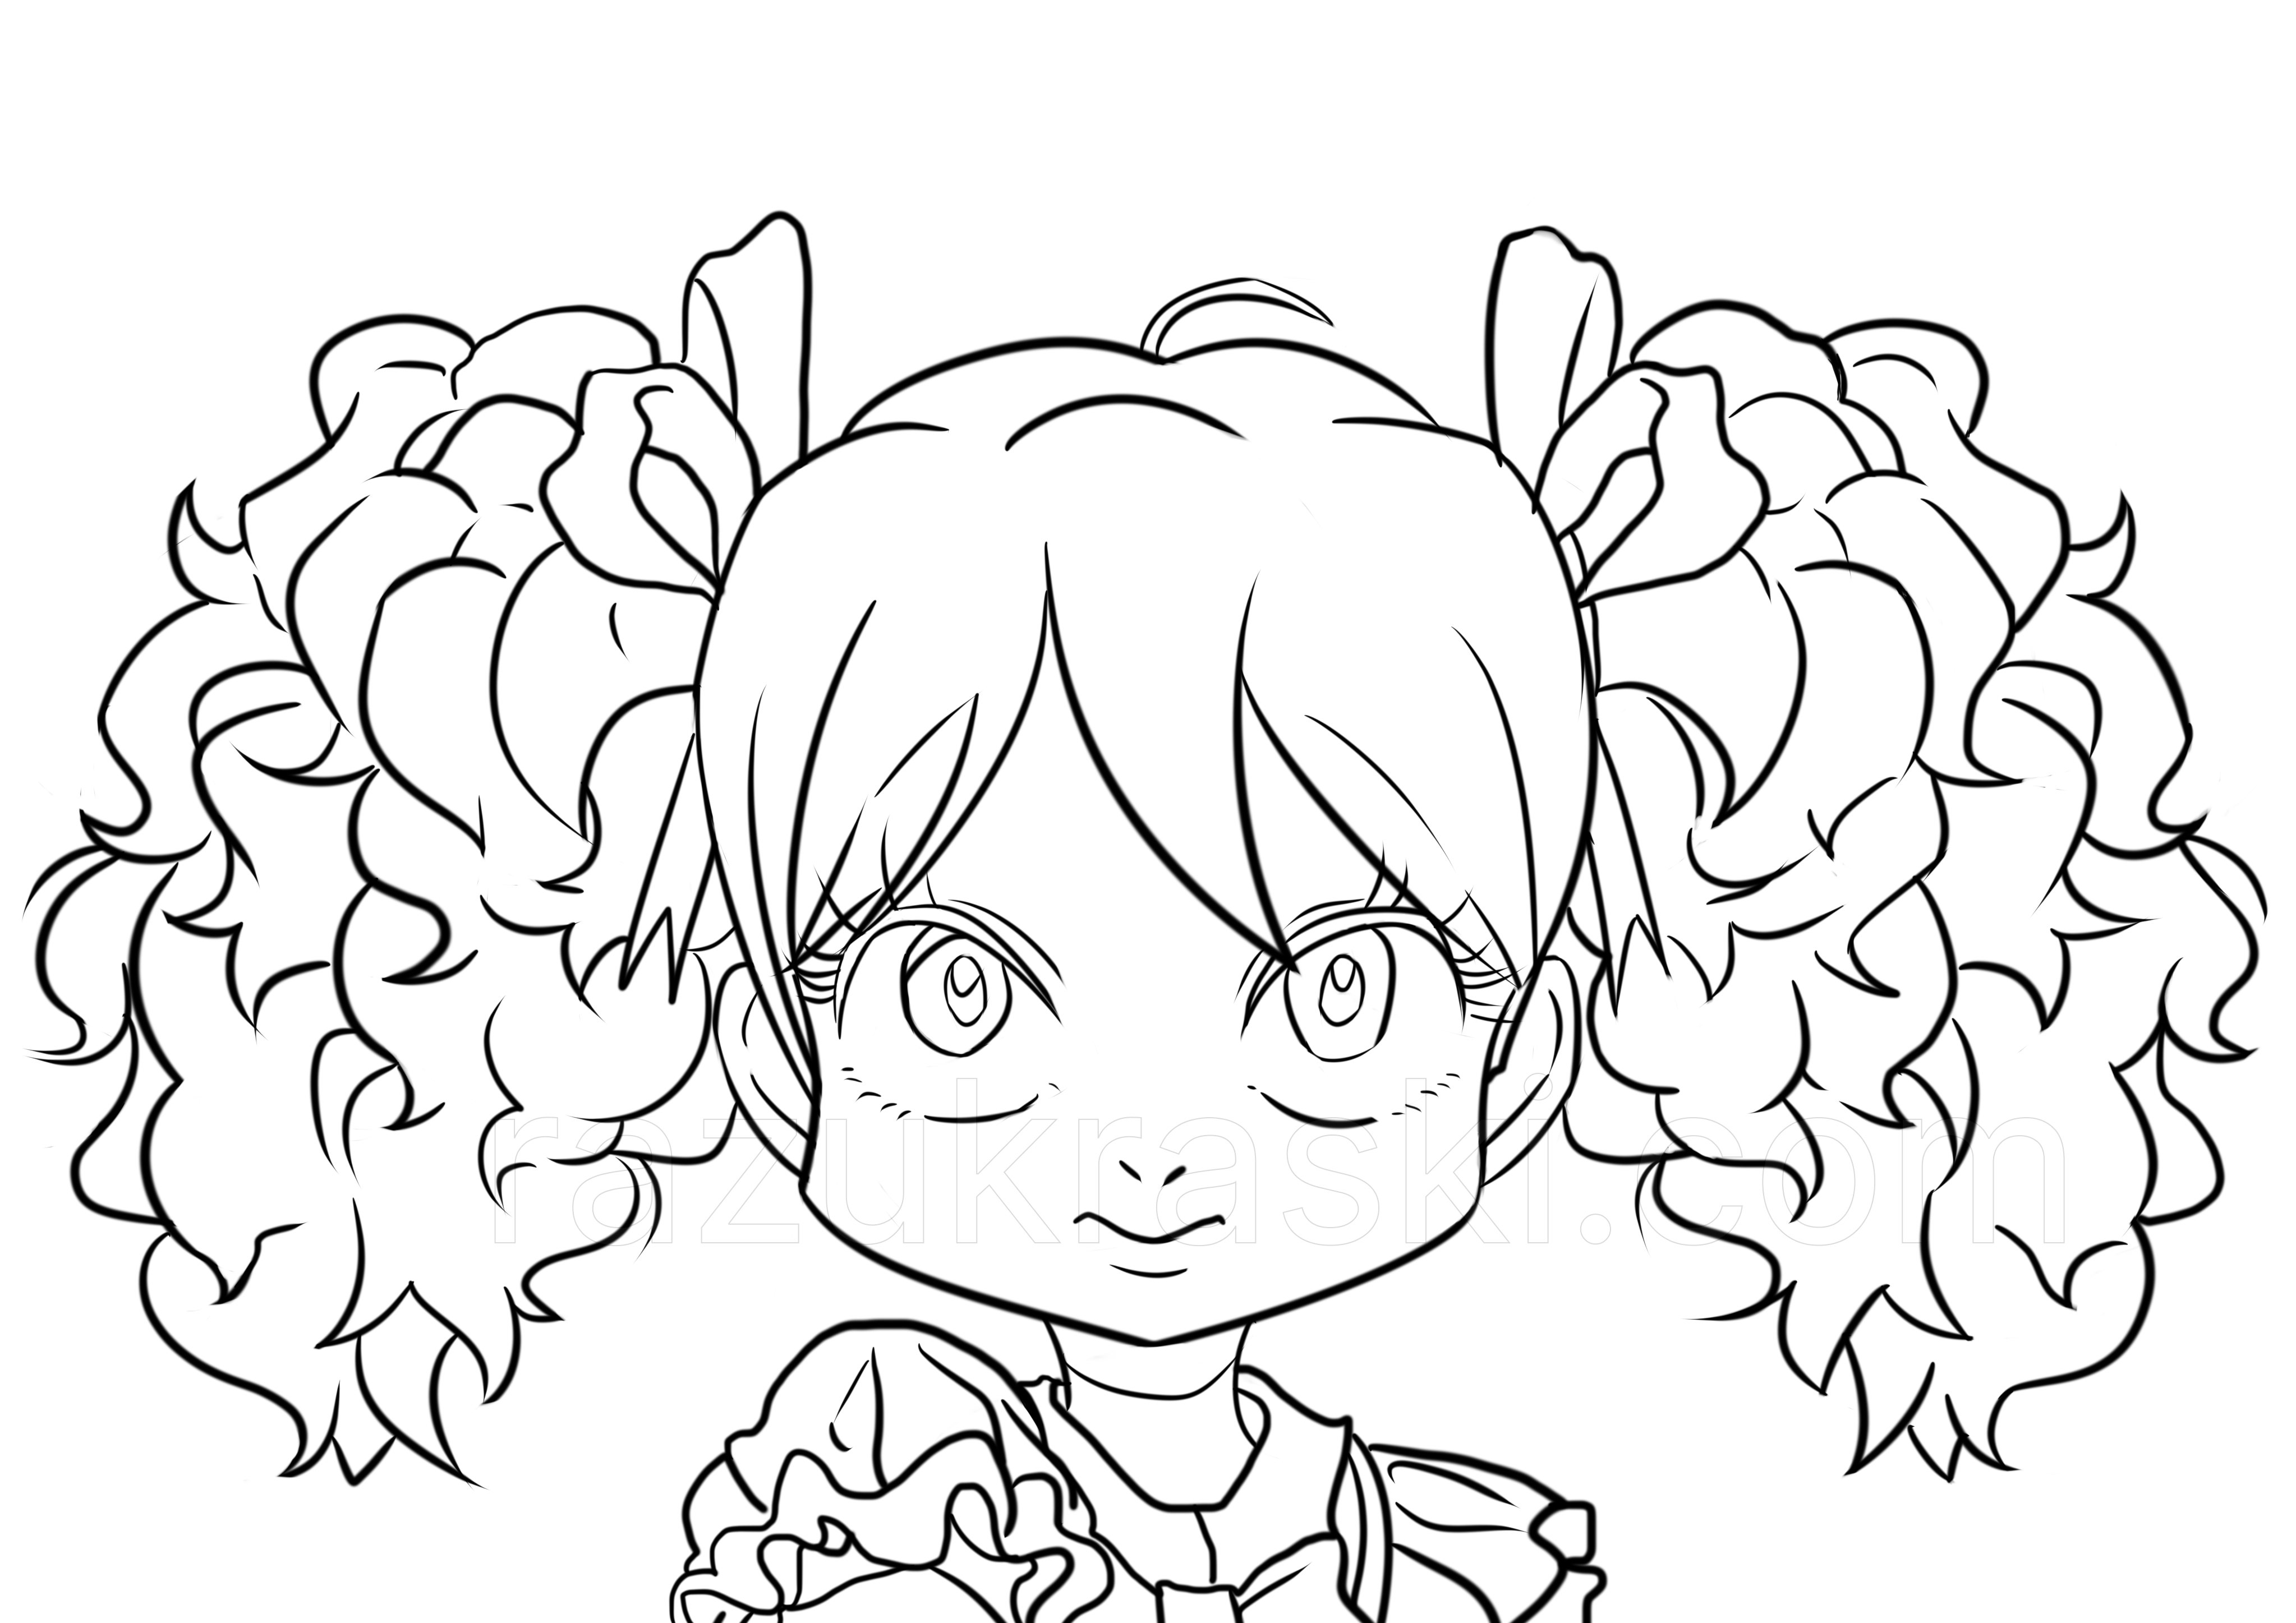 Coloring page Huggy Wuggy doll